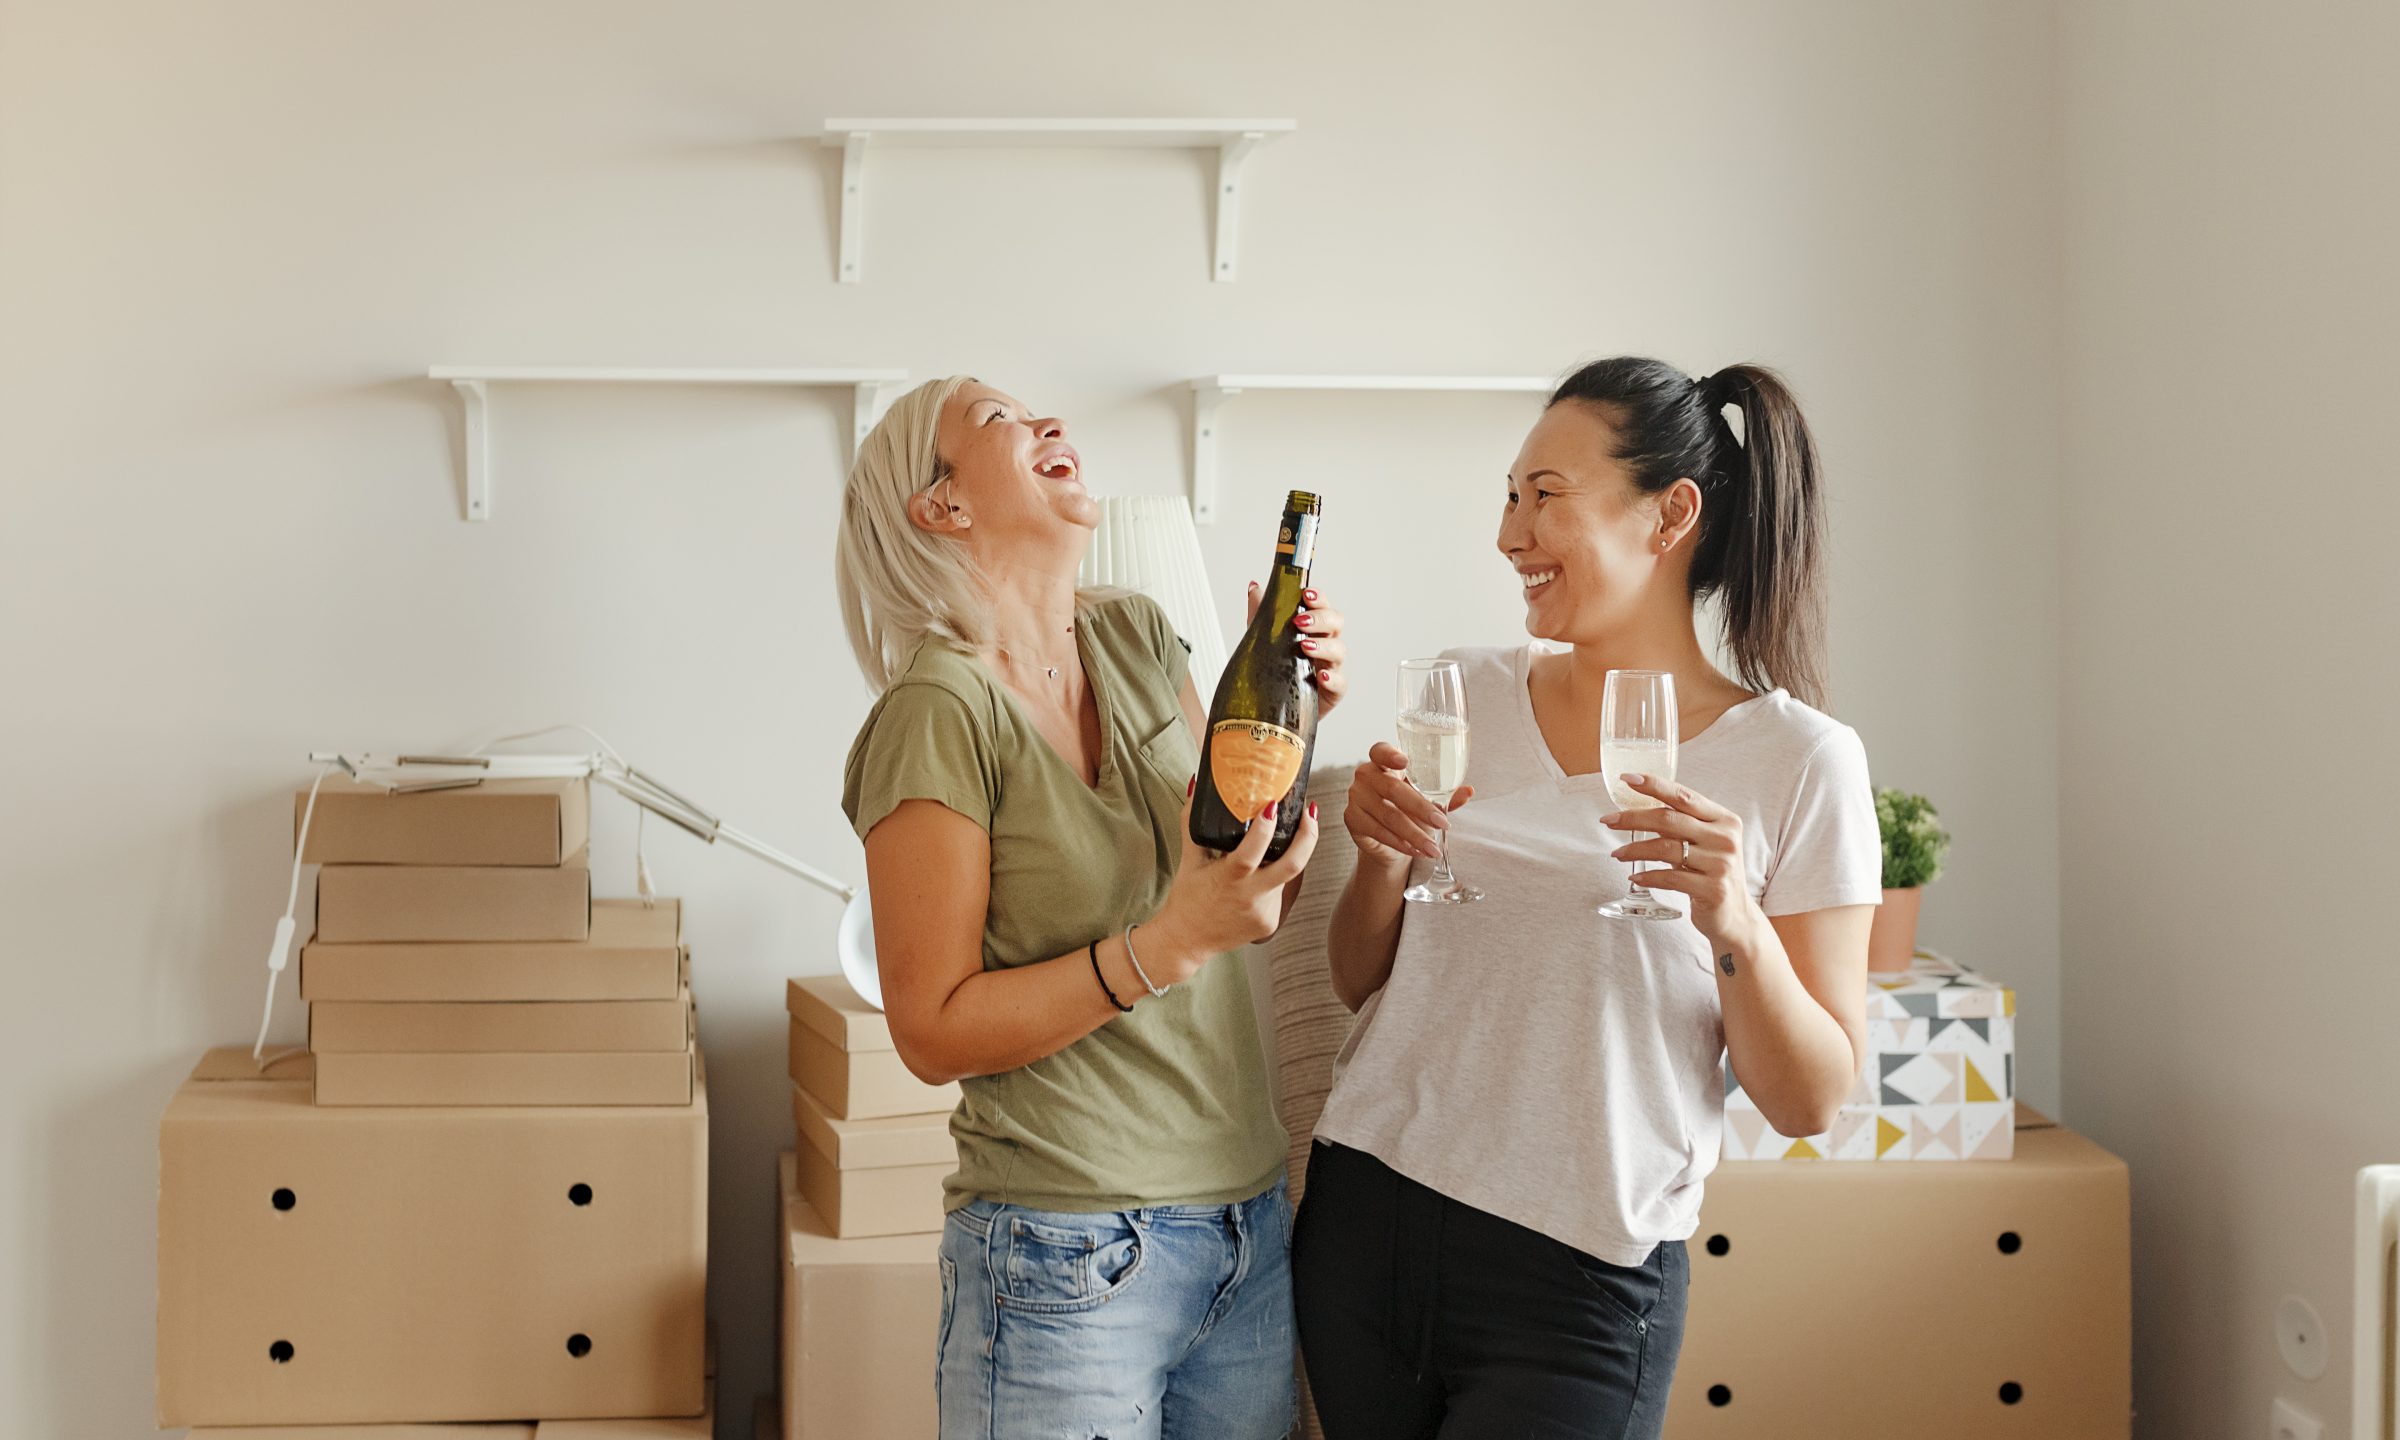 13 Essential Tips for the First Time Home Buyer worth Knowing